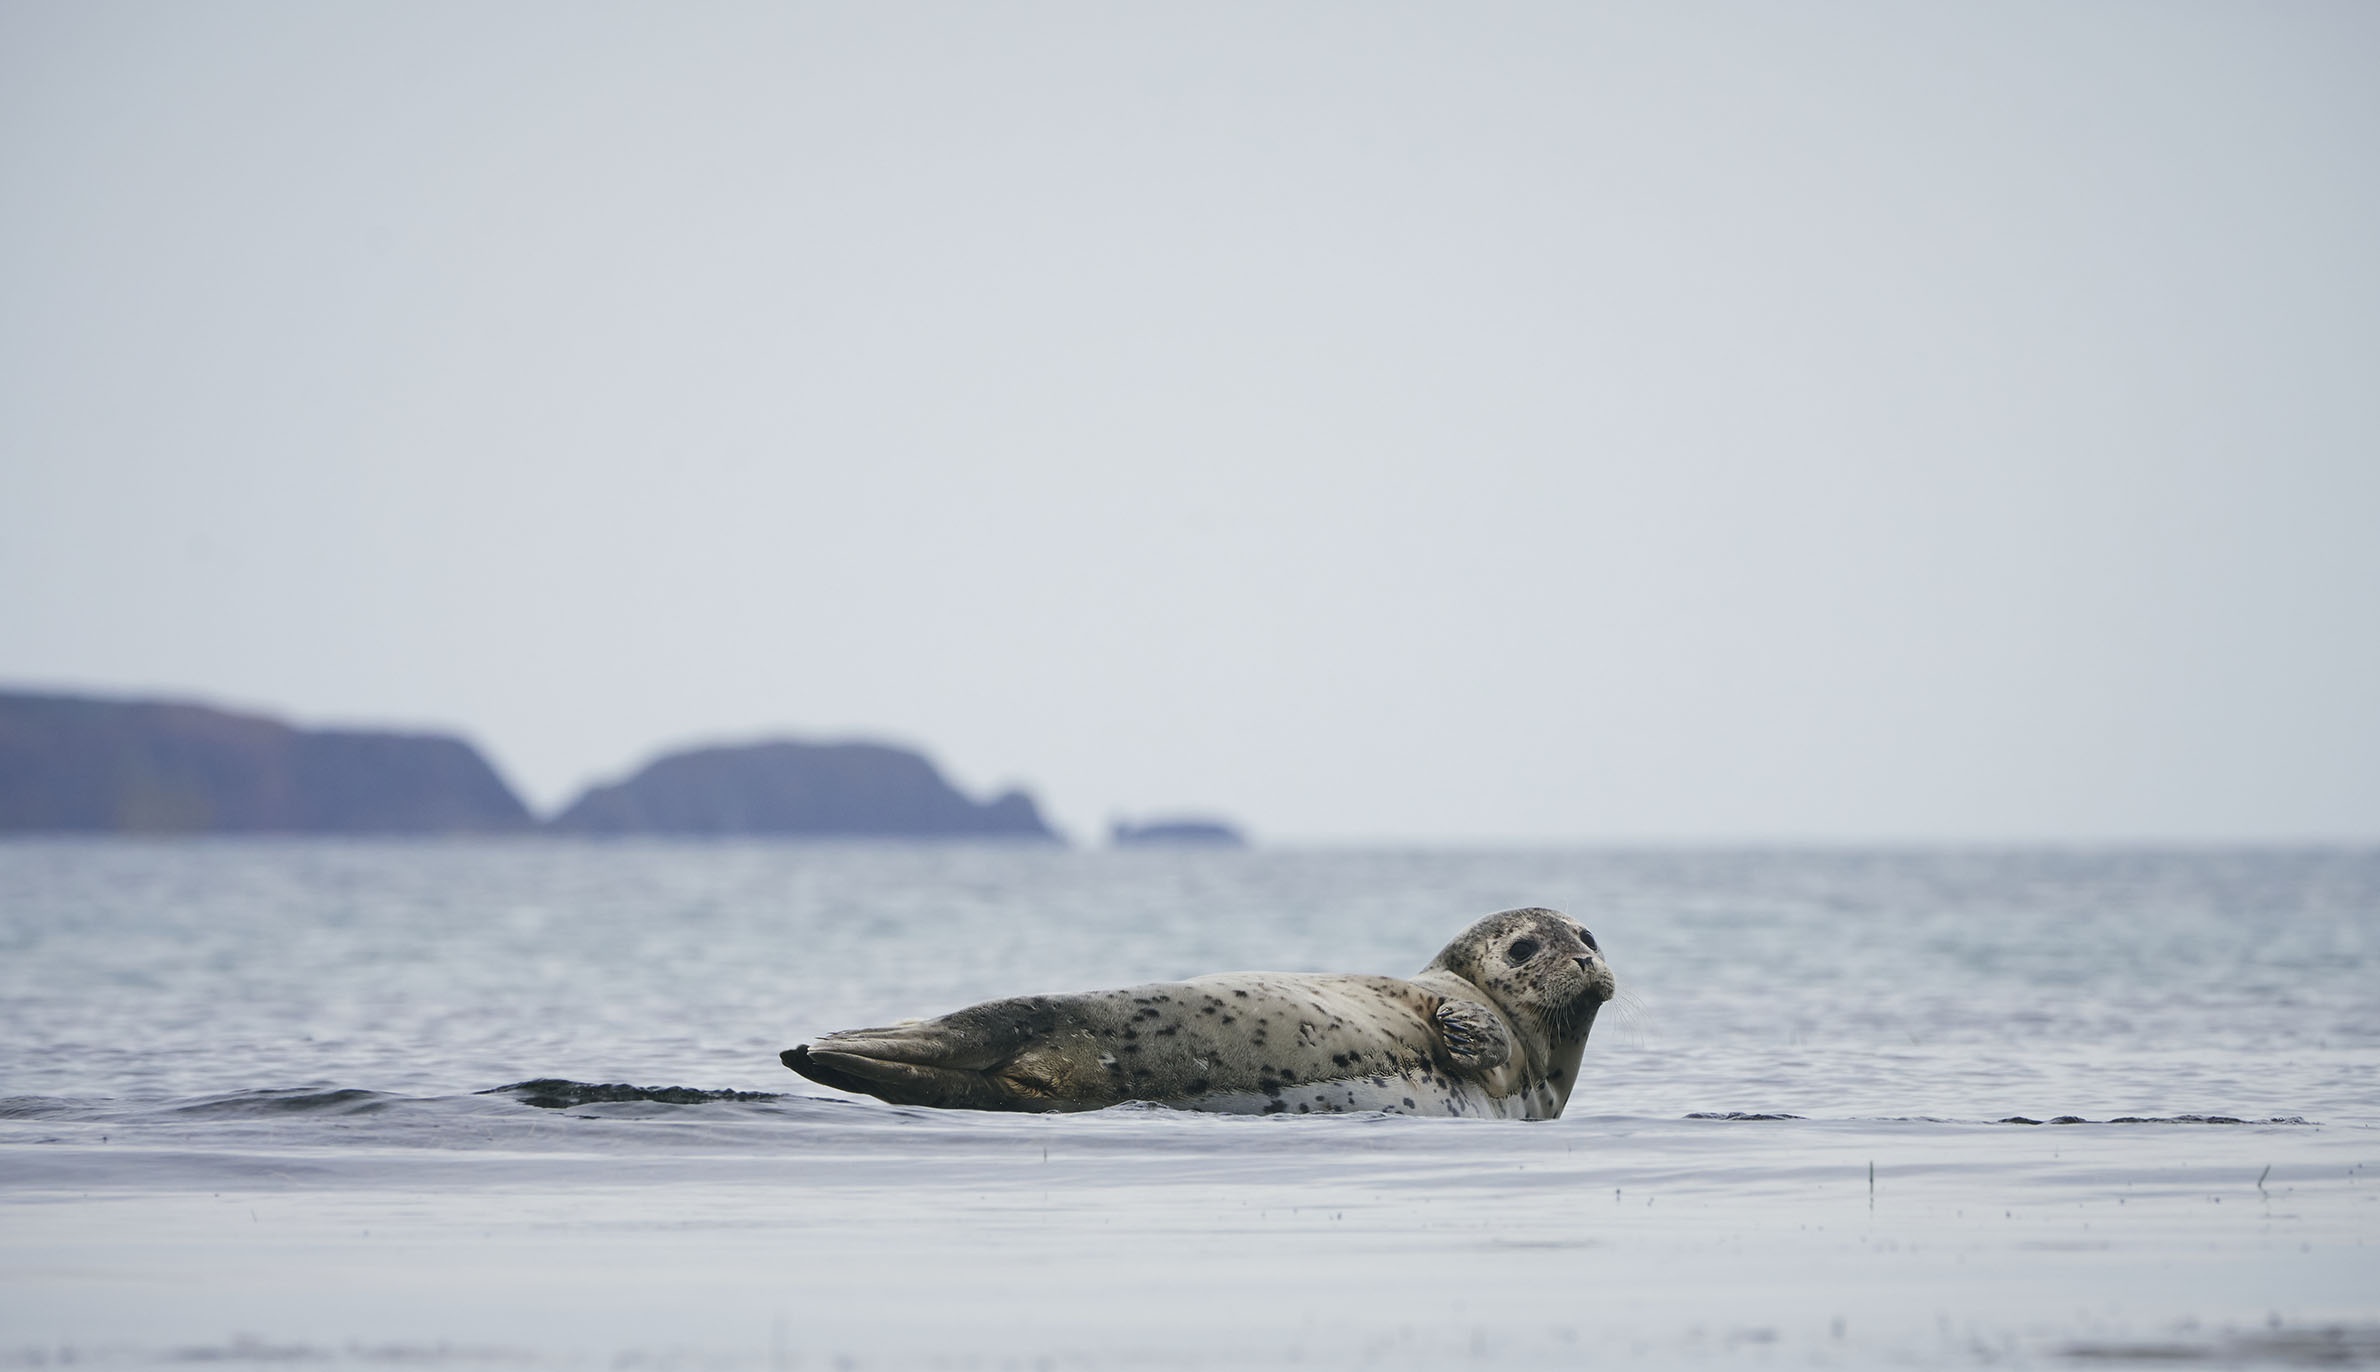 A photograph of a seal swimming in shallow water taken on Rebun Island.